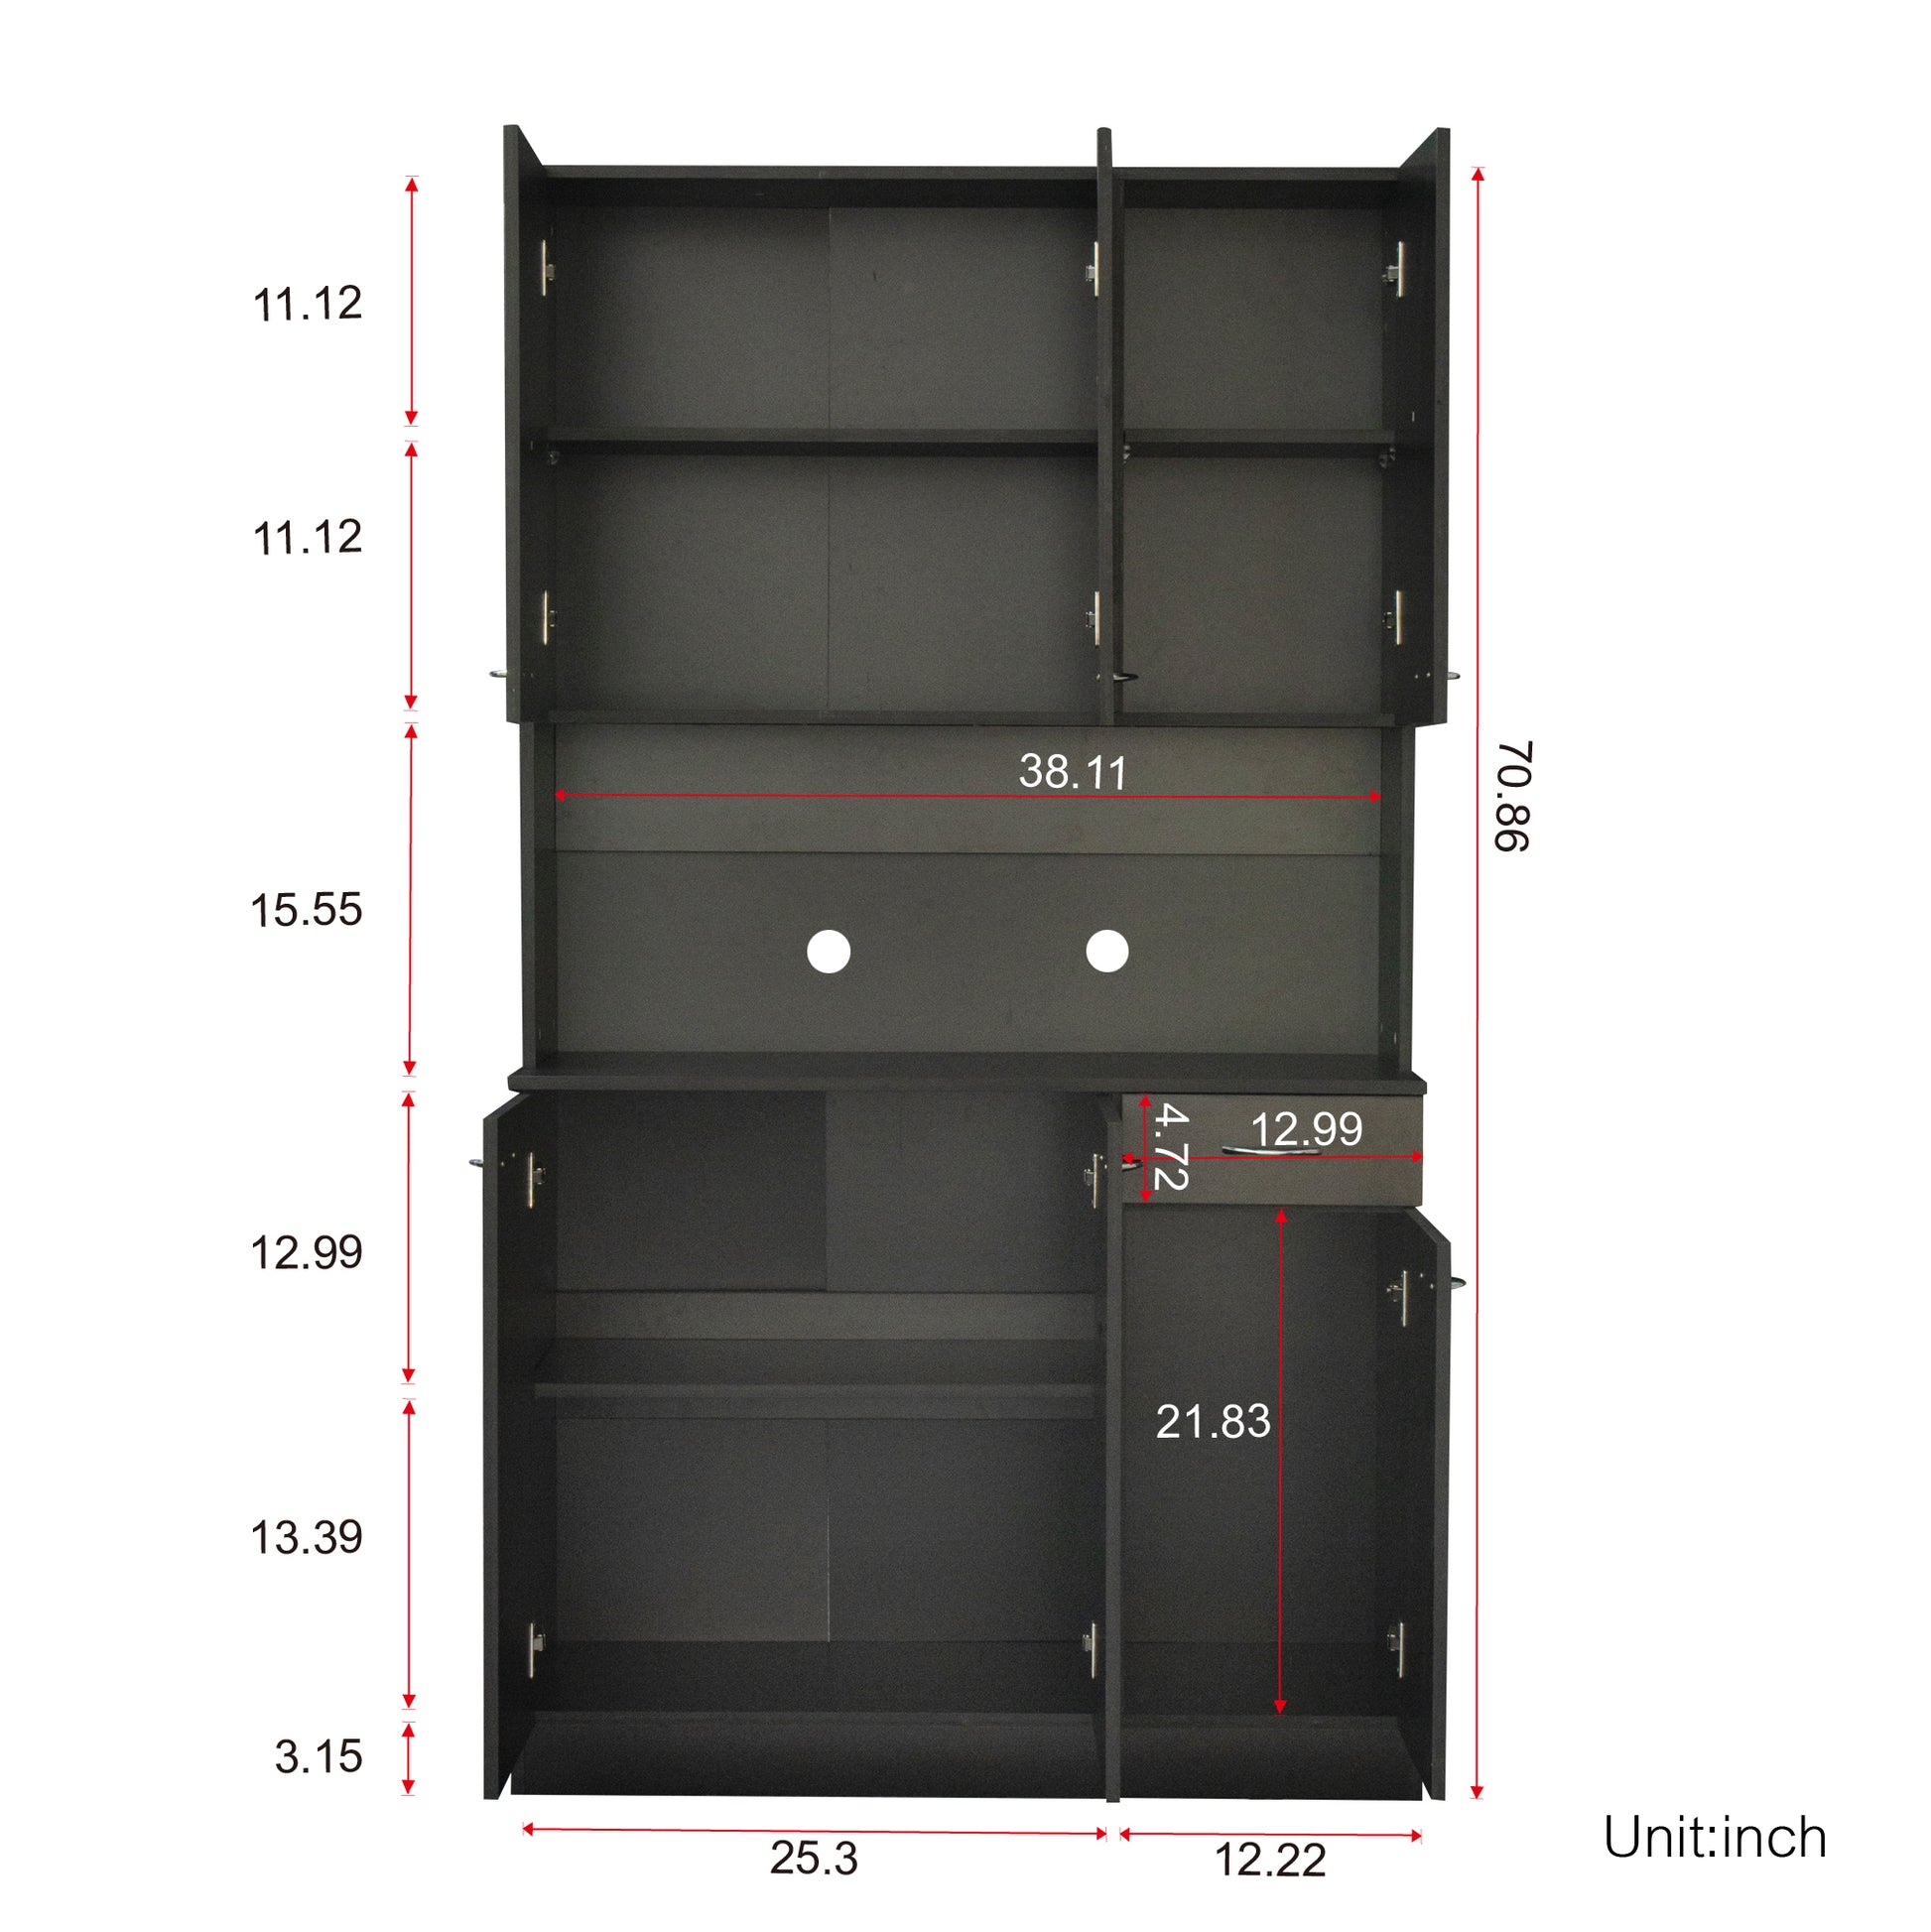 70.87" Tall Wardrobe& Kitchen Cabinet, With 6